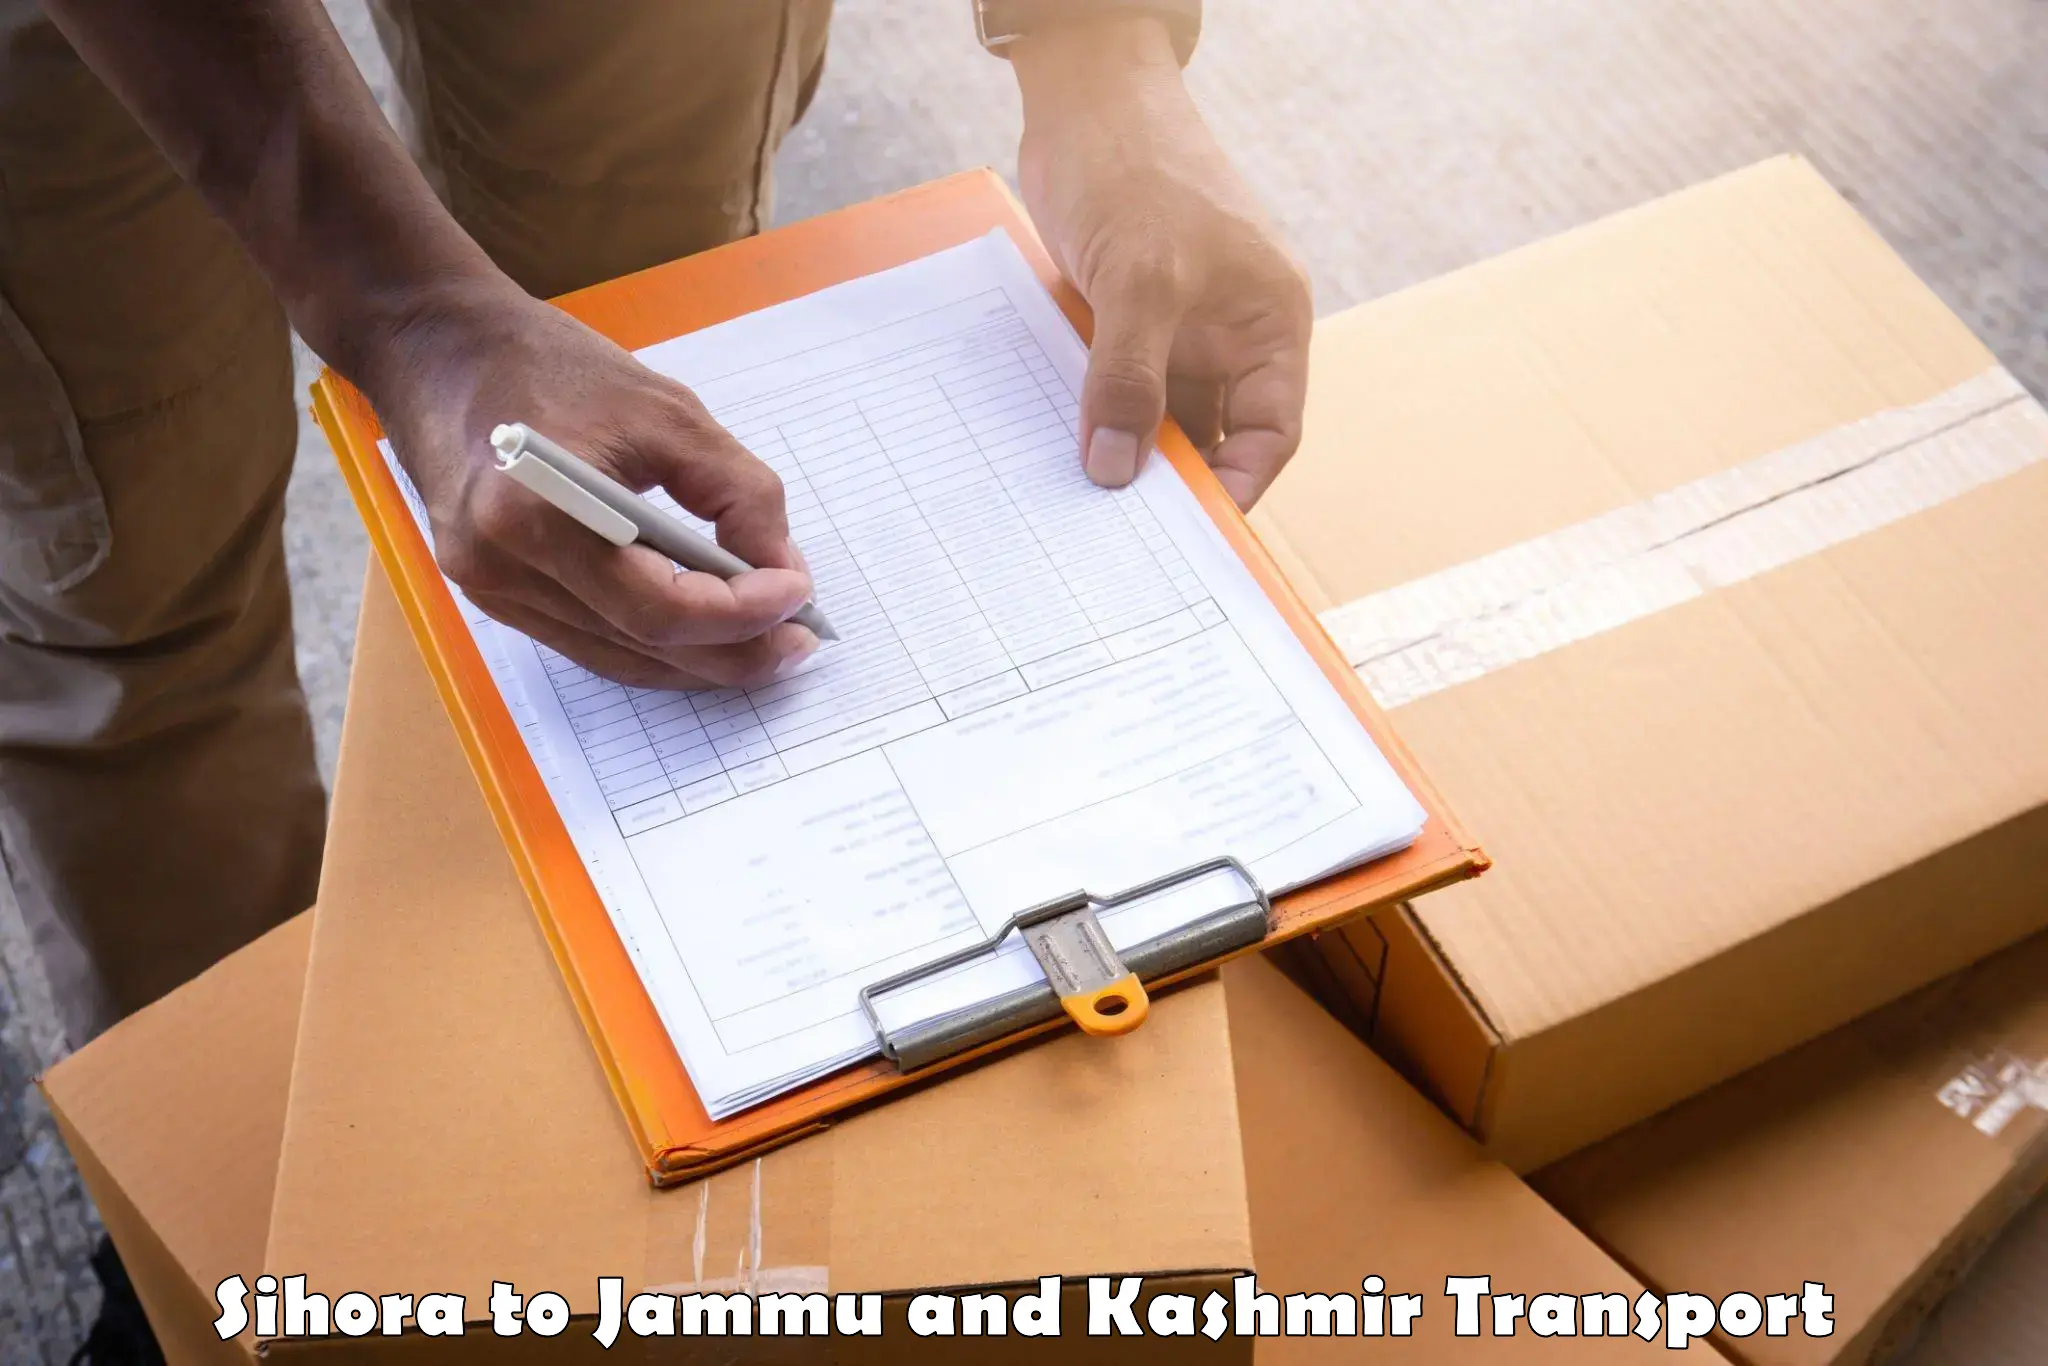 Daily parcel service transport Sihora to Jammu and Kashmir